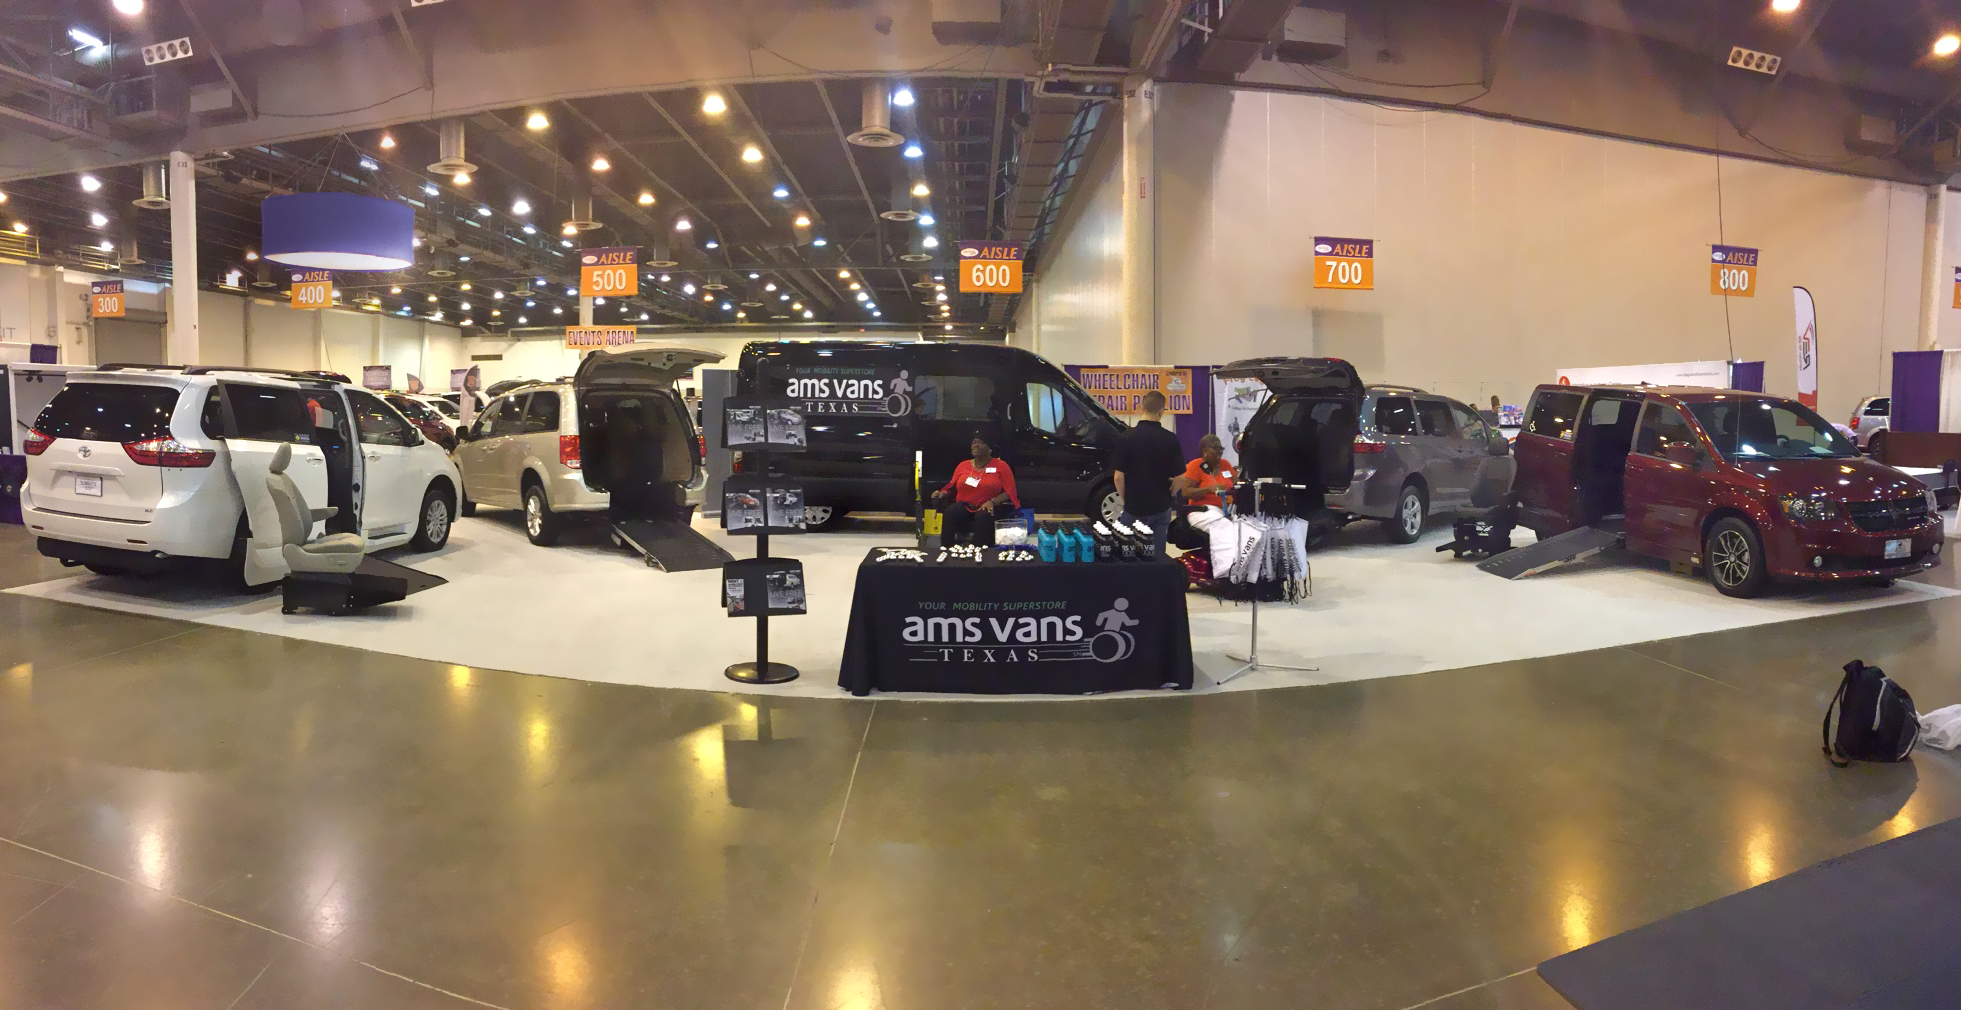 Please visit the AMS Vans mobility freedom booth at the Houston Abilities Expo.